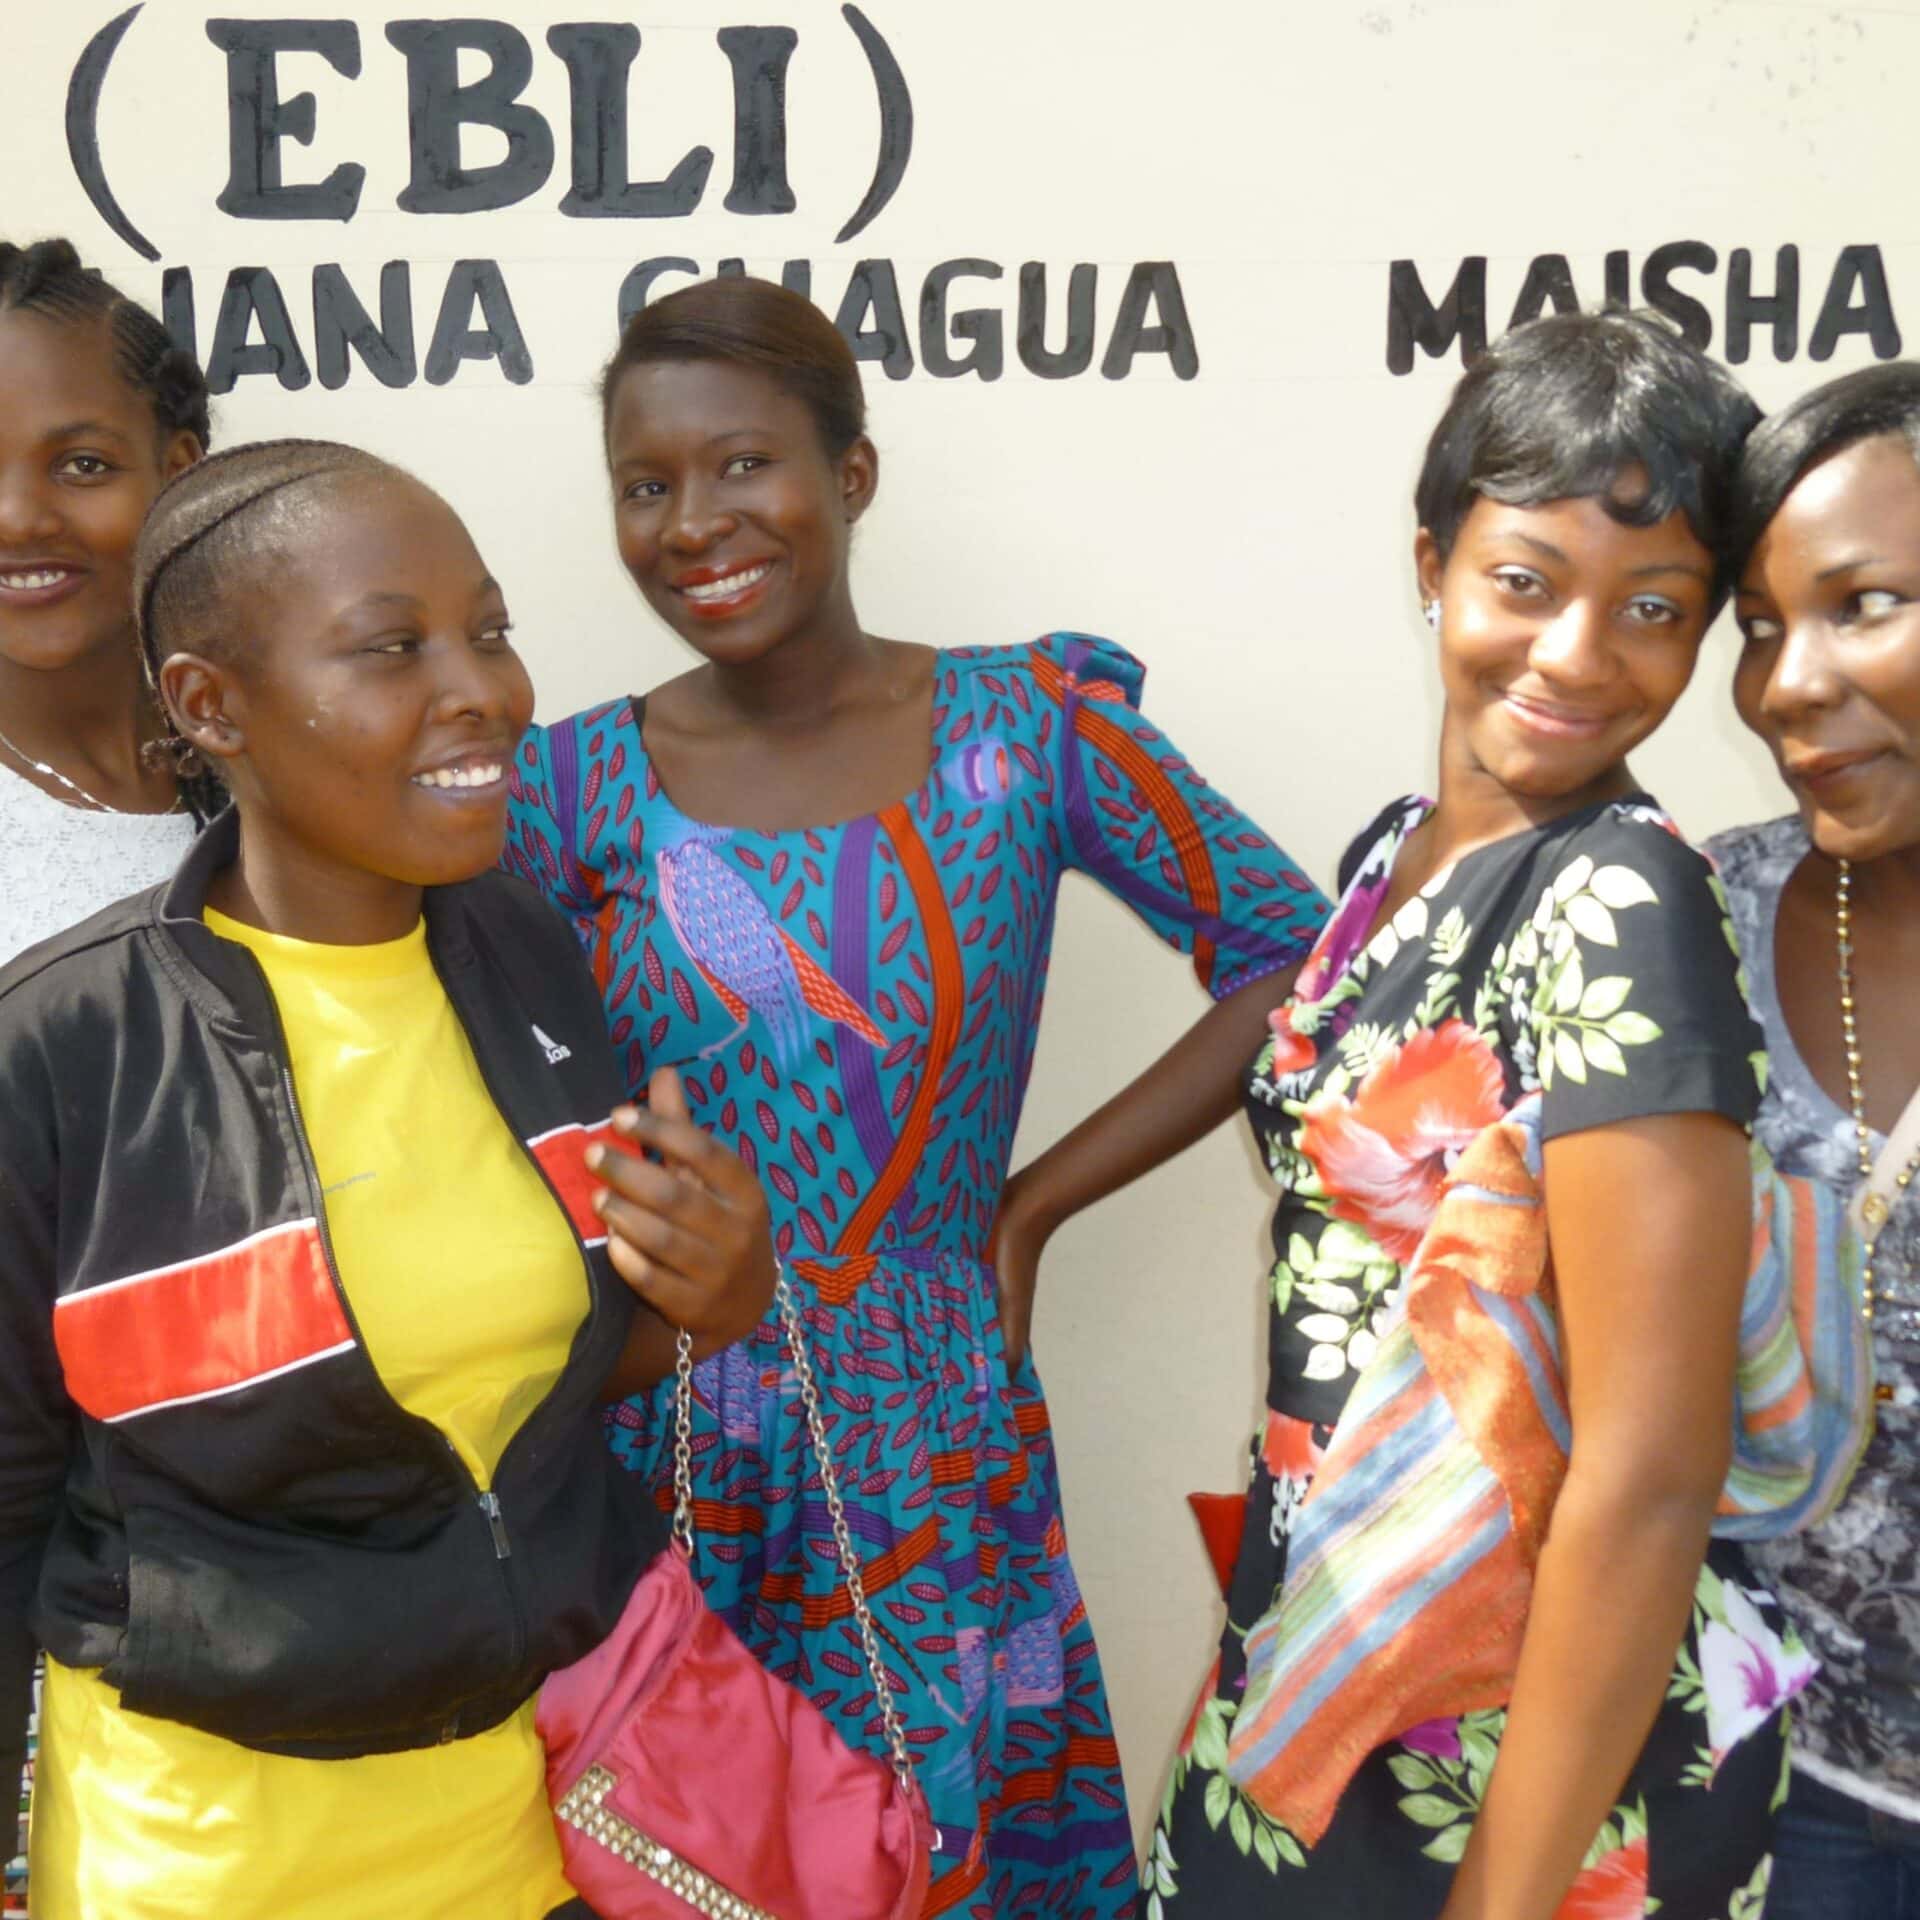 Group picture with five young women from Tanzania.